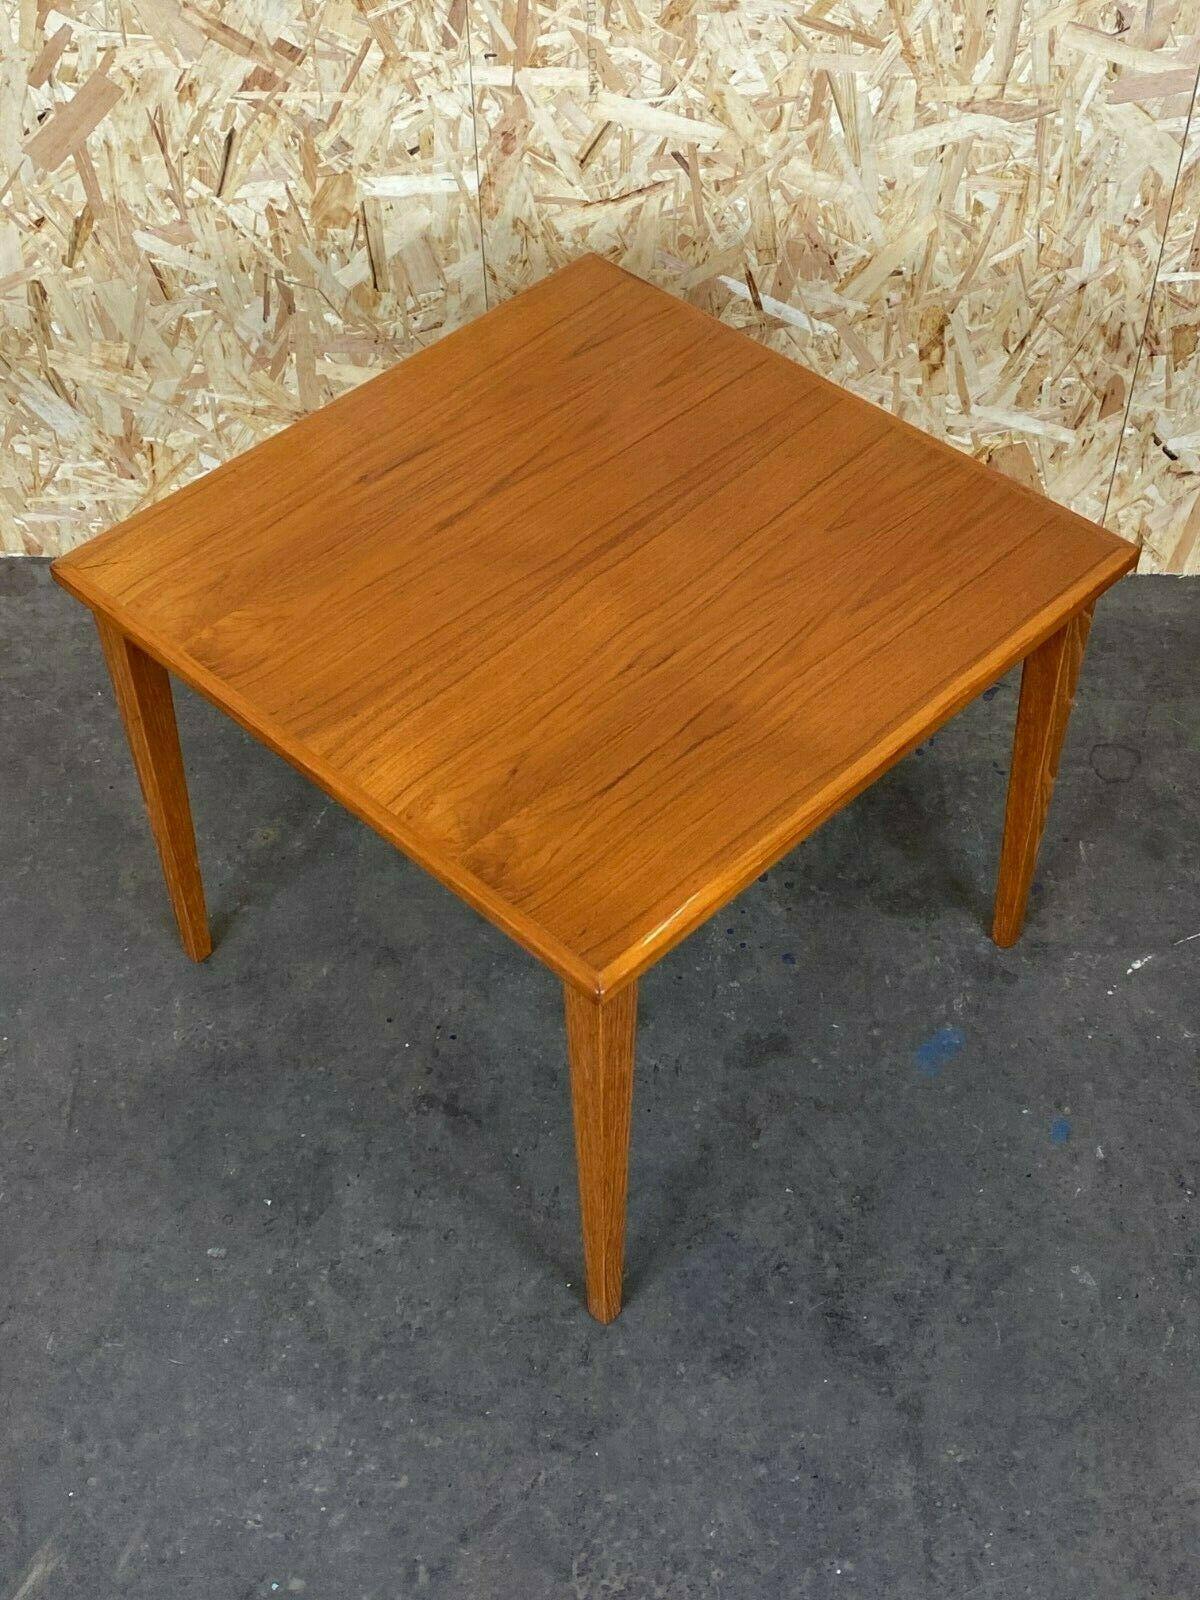 70s style table